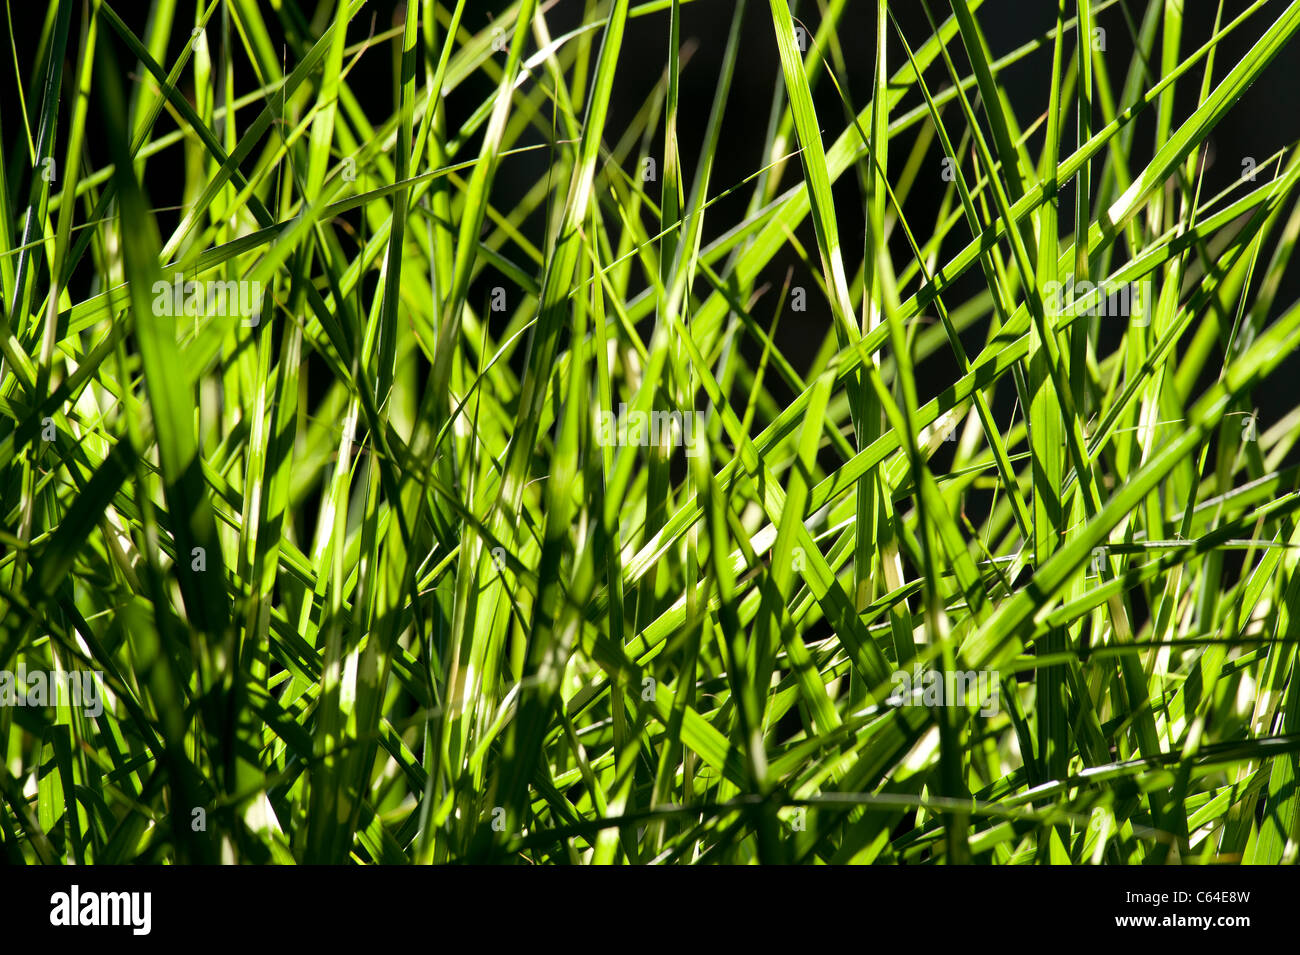 Background of cultivated Tiger Grass Stock Photo